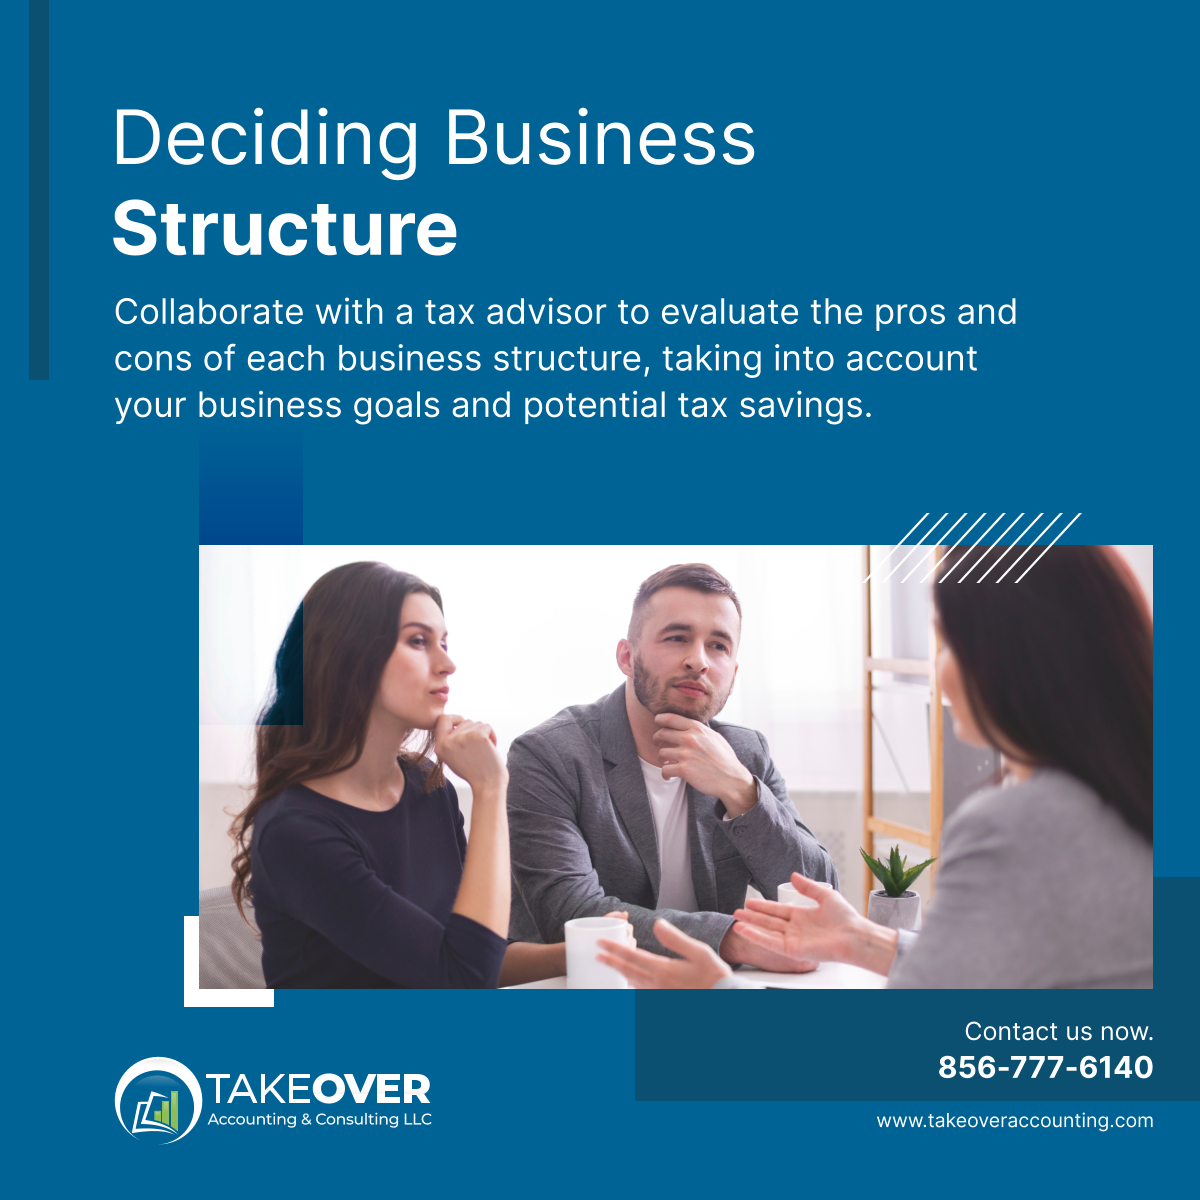 Your business structure - sole proprietorship, LLC, or S corporation - is more than just a legal formality; it significantly impacts your tax obligations. 

#CherryHillNJ #AccountingServices #BusinessStructure